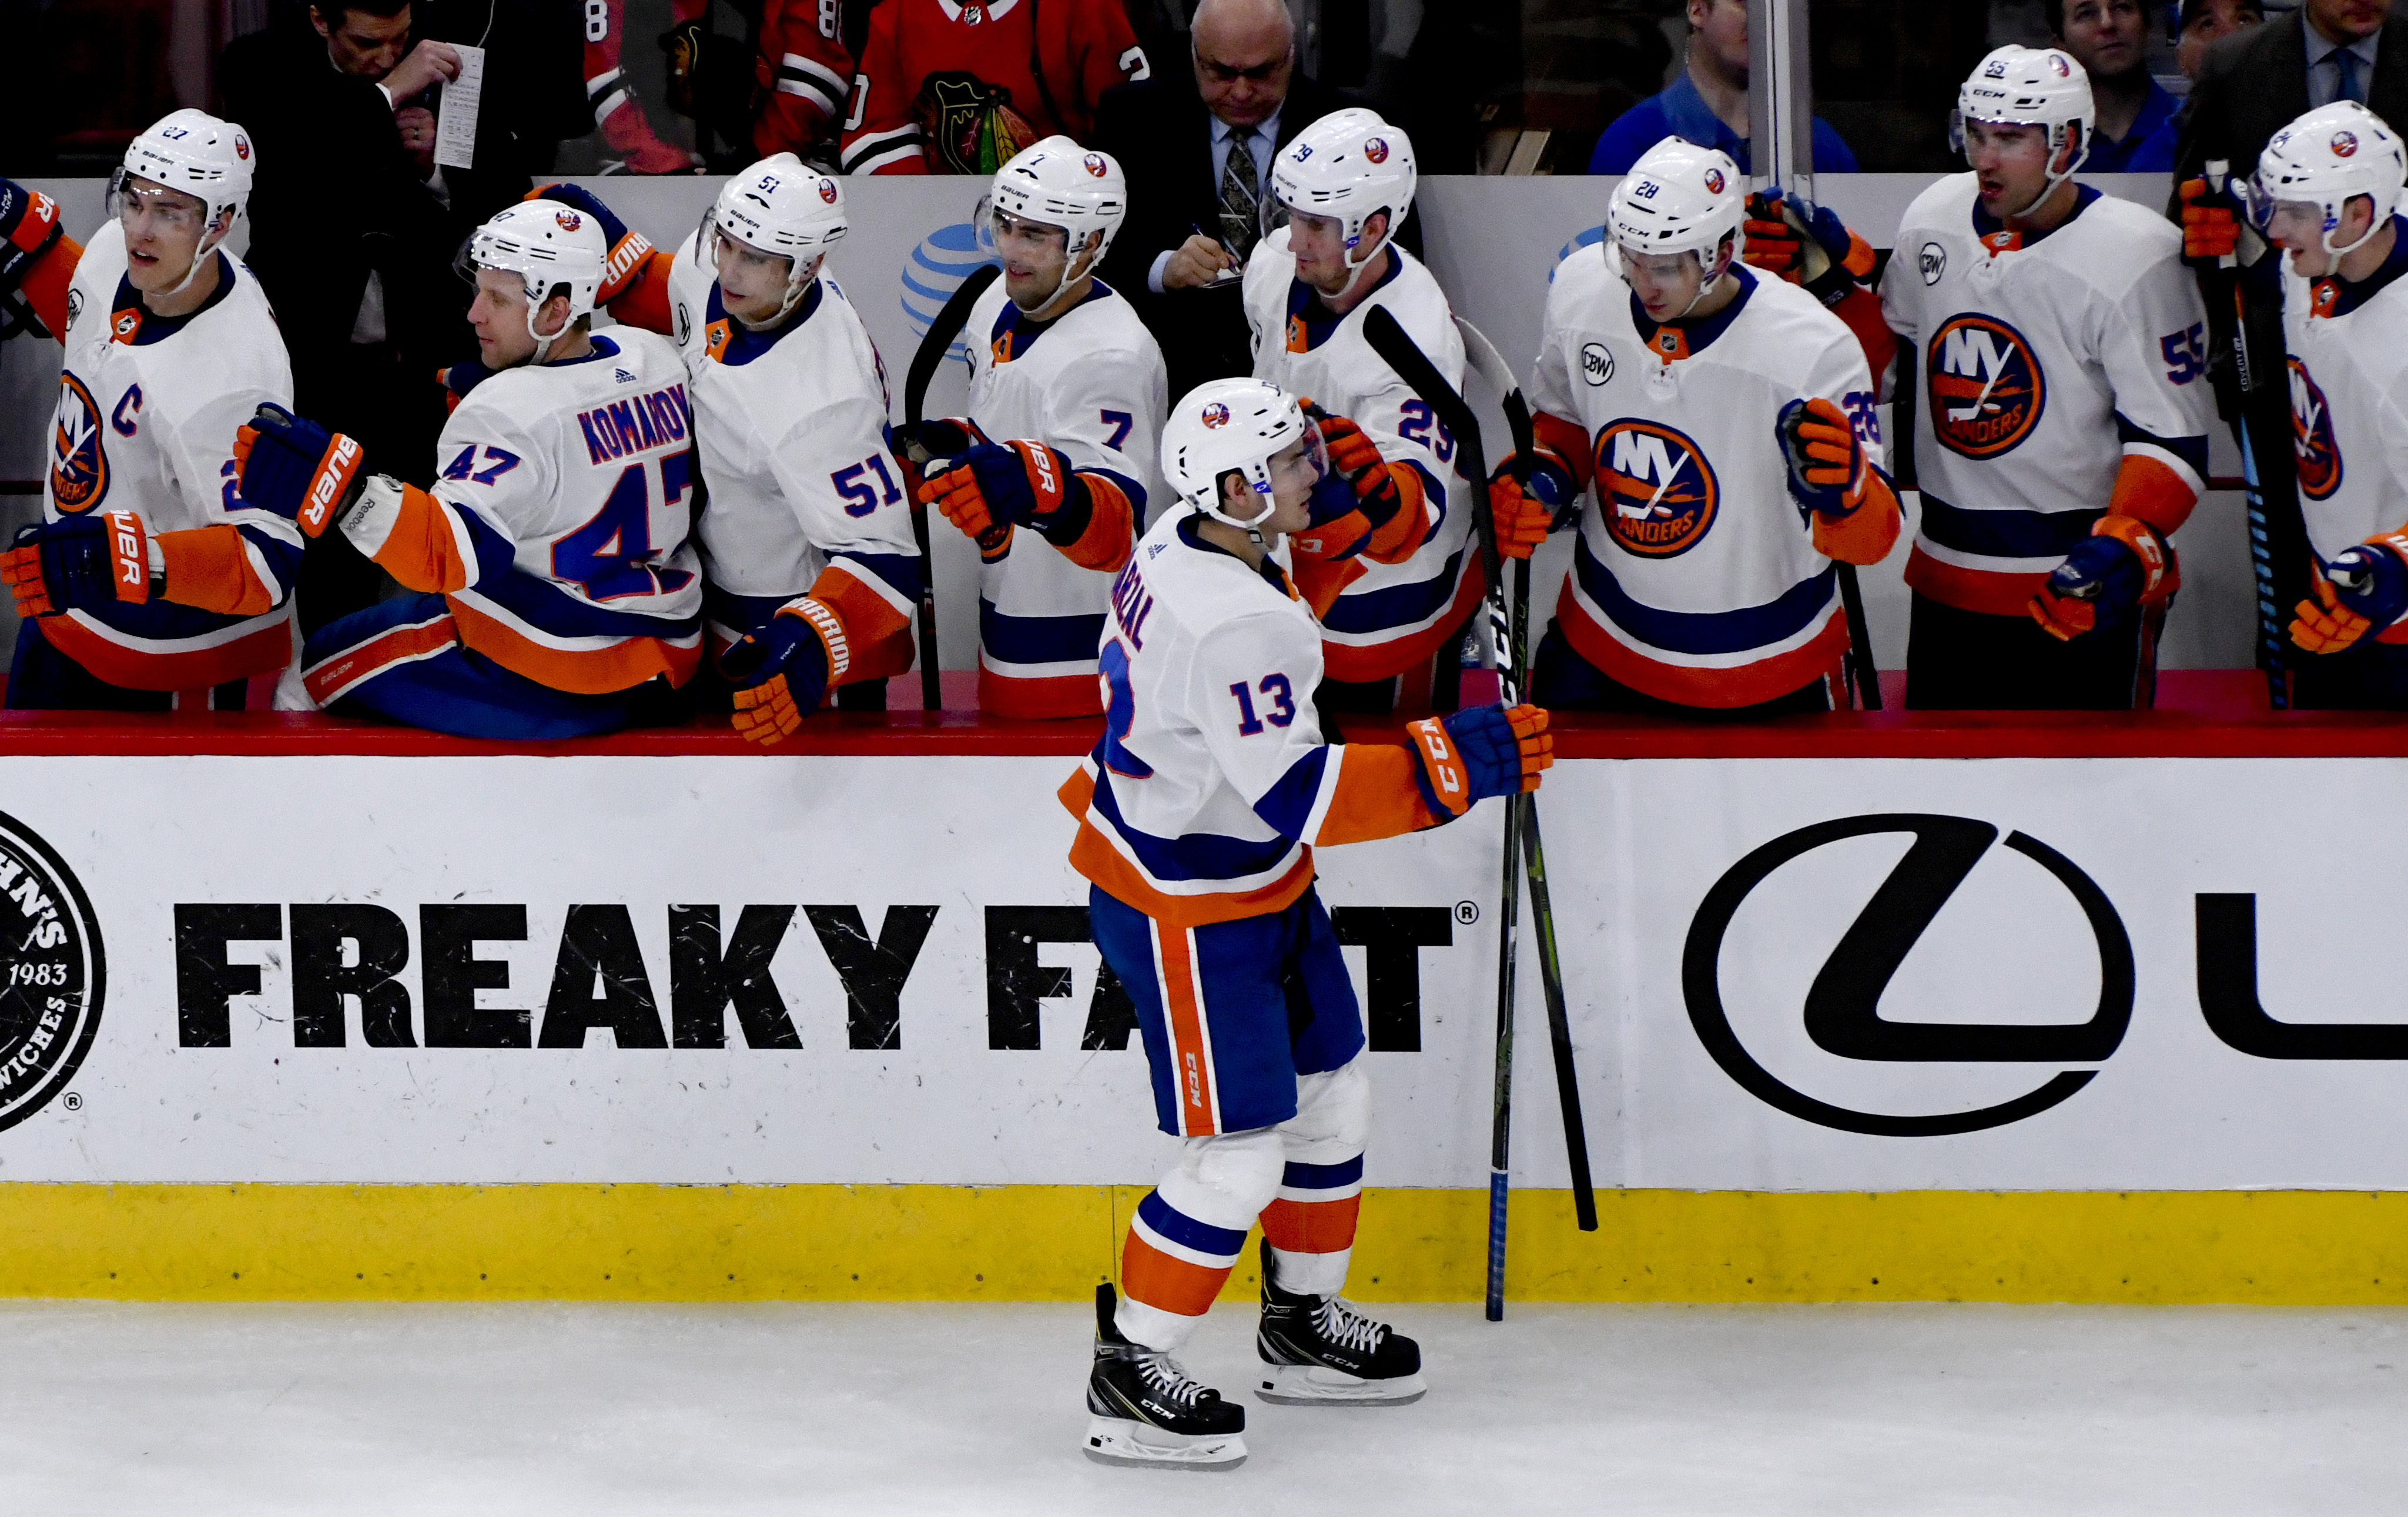 Mathew Barzal receives congratulations from the Islanders’ bench after scoring his 14th goal of the year during New York’s 3-2 shootout loss to the Blackhawks in Chicago on Tuesday night. AP Photo/Matt Marton